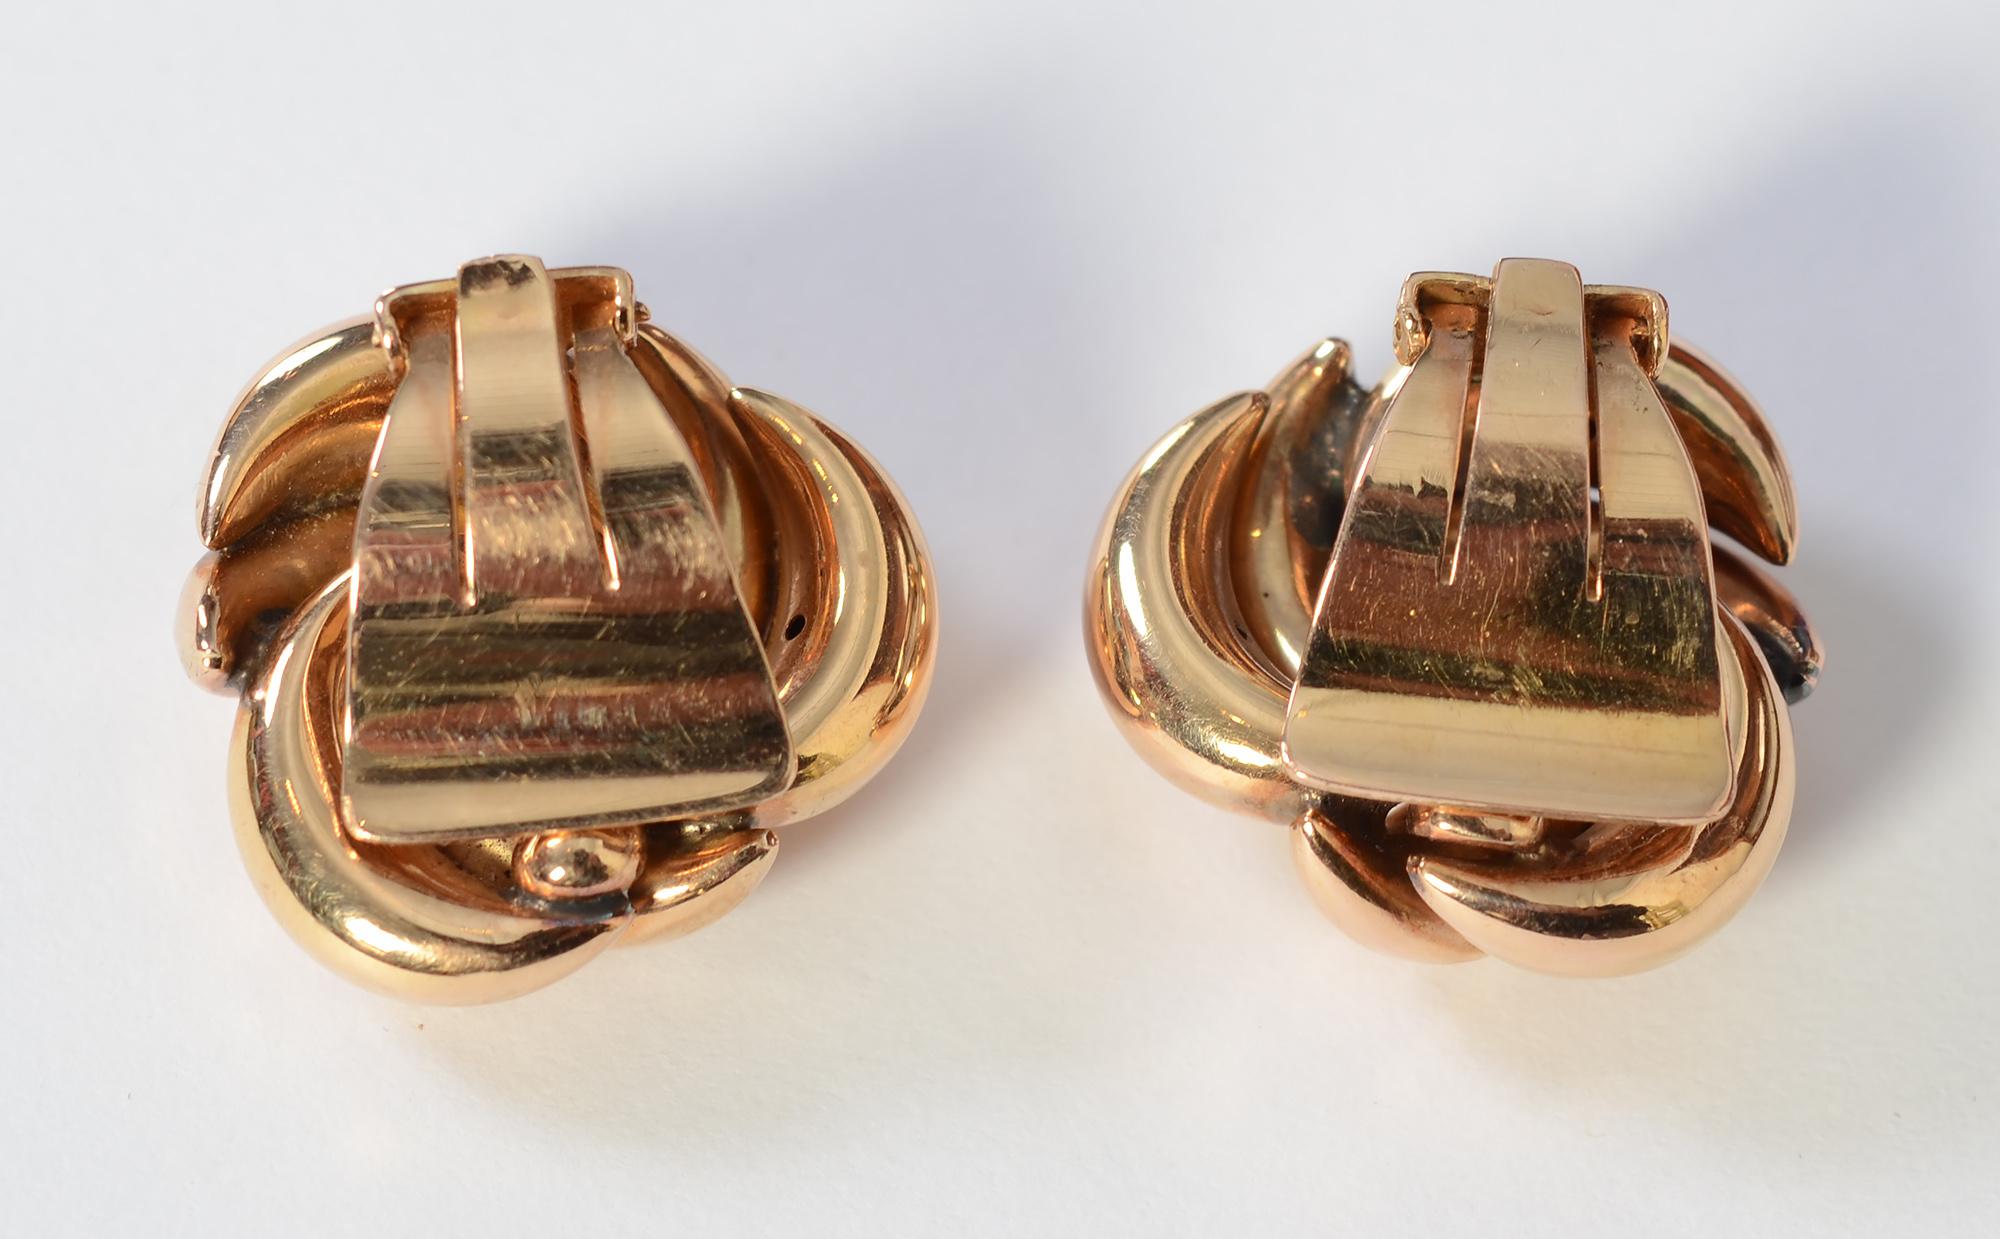 Classic gold knot earrings in 18 karat gold from the middle of the 20th century. Clip backs can be converted to posts. Made of a rich shade of pink/yellow gold.
What may appear to be dents are not- they are shadows in the photos. Condition is